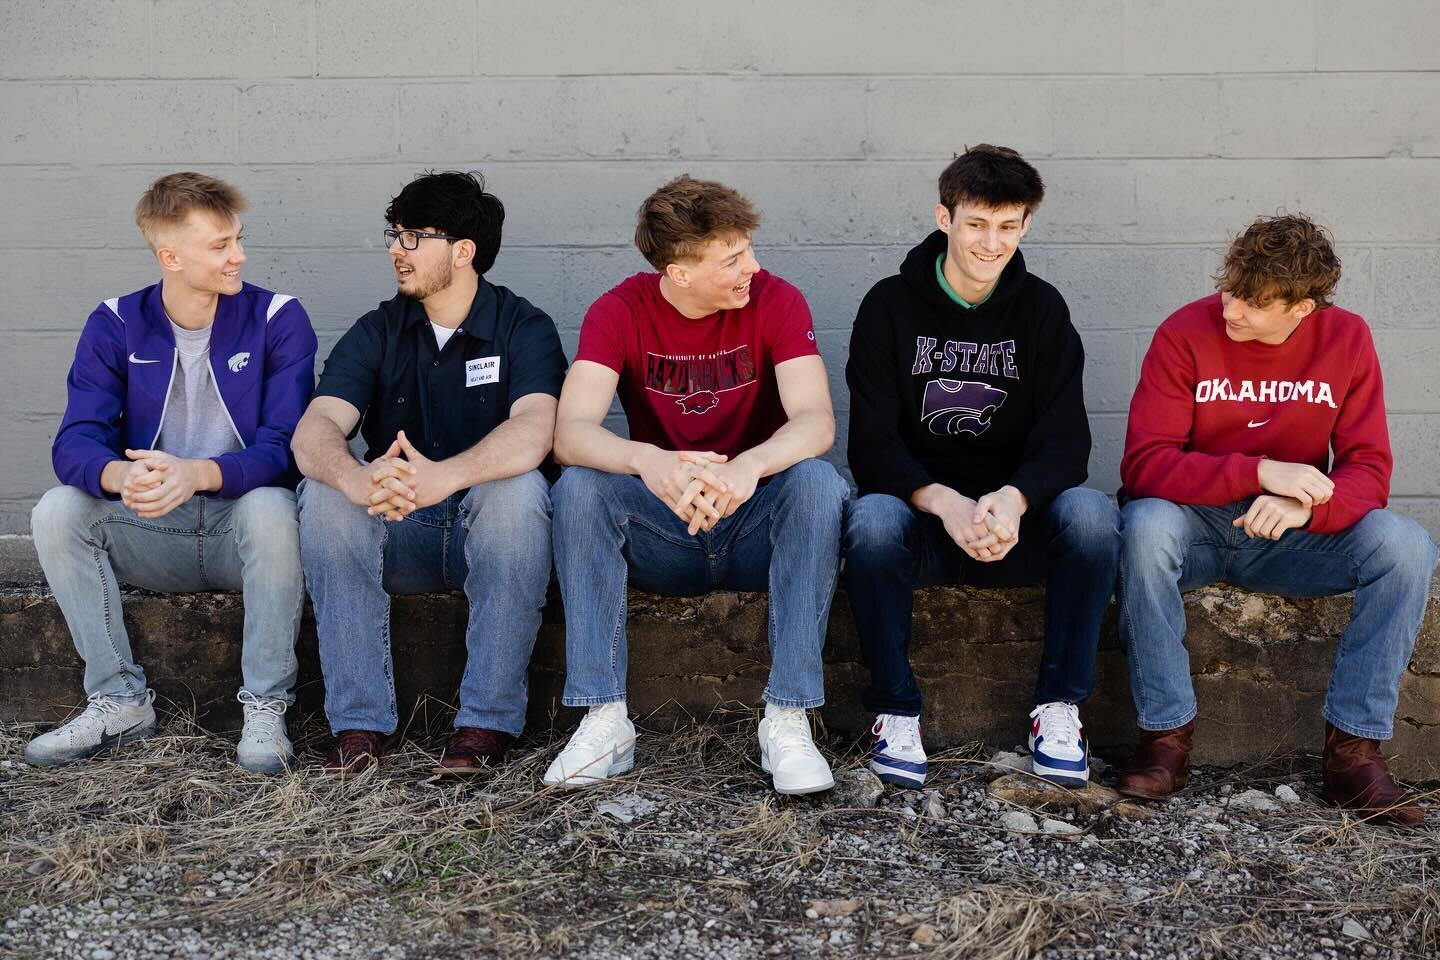 Right now it&rsquo;s all about the seniors! In the last two weeks I&rsquo;ll have photographed 11 seniors- including these 5 life long friends. That one on the far left is one of ours&hellip; and while he is looking towards the future, I&rsquo;m remi